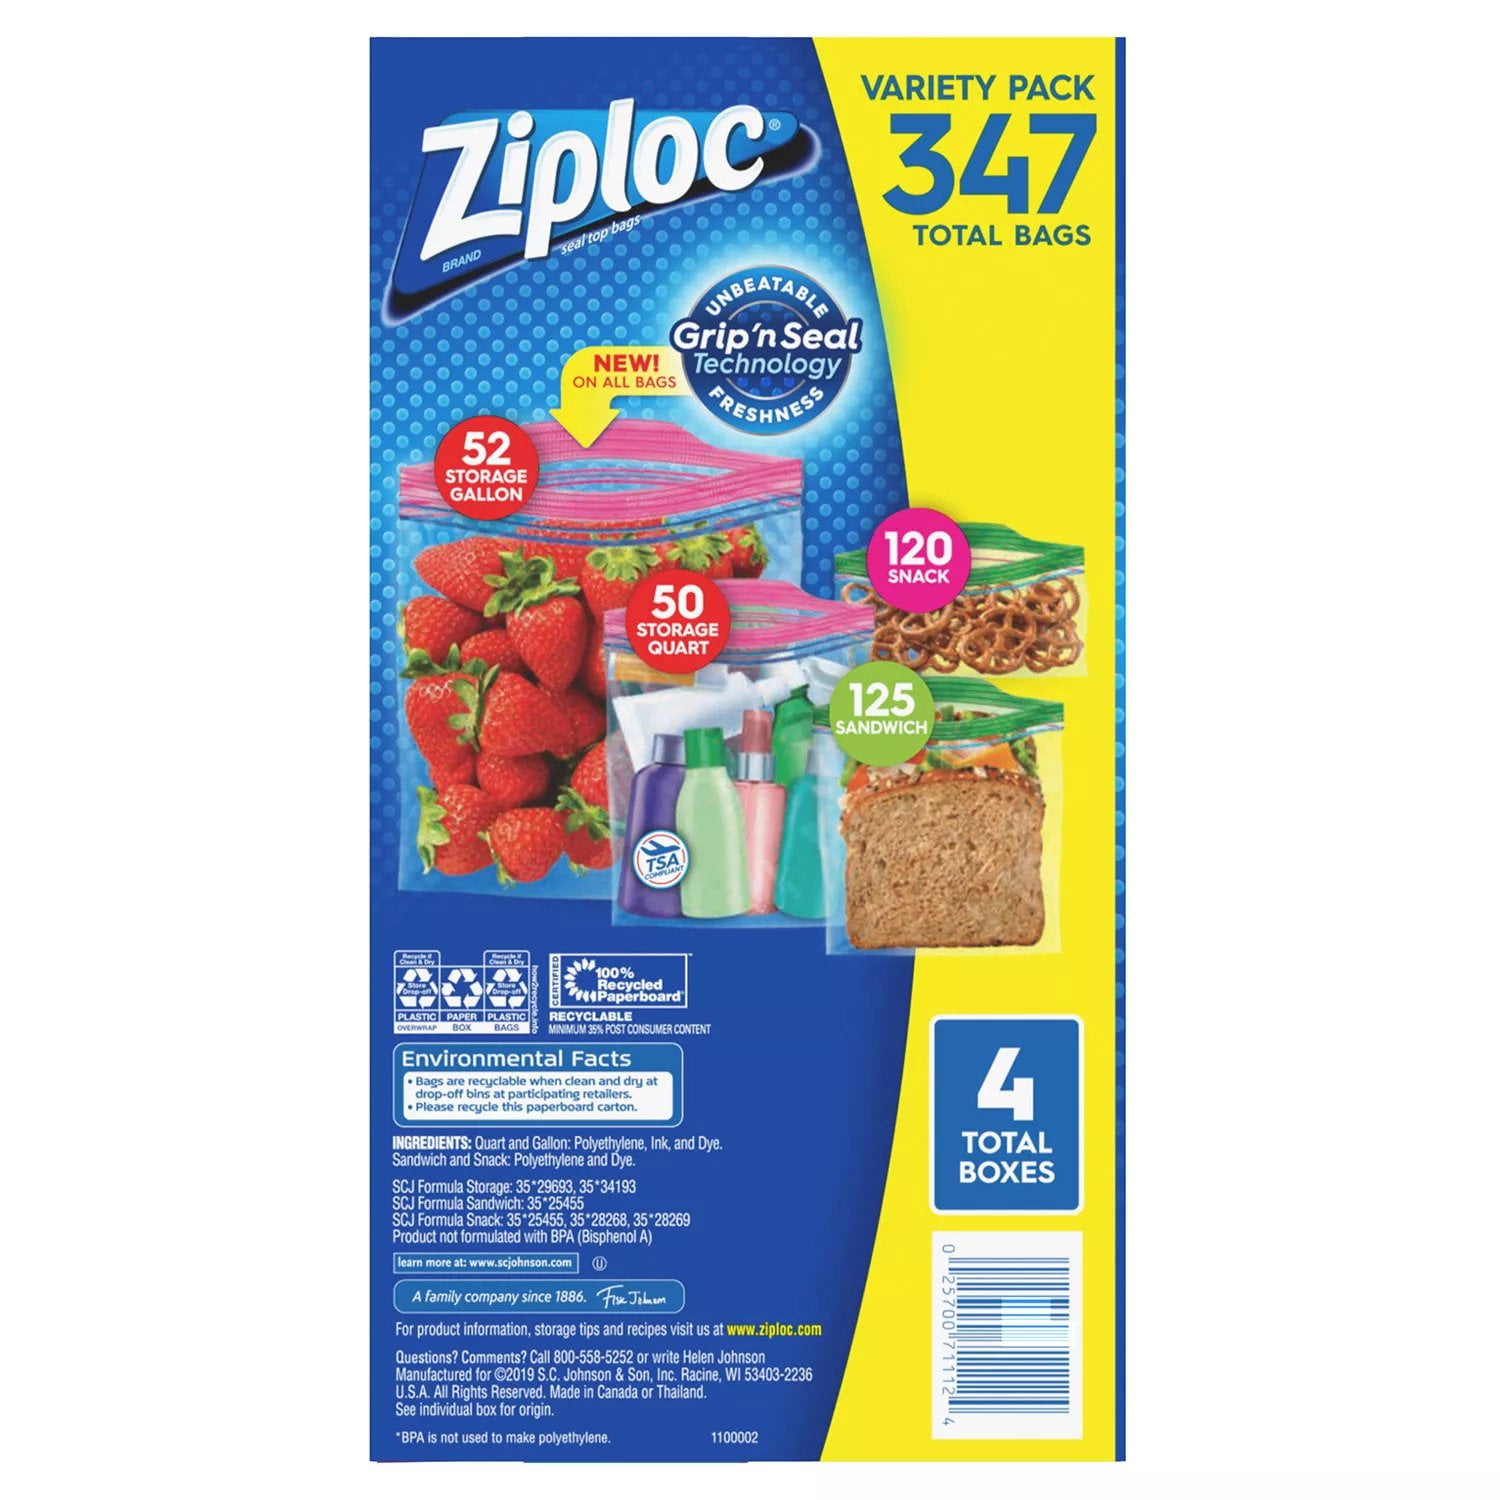 Product of Ziploc, Storage Bags - Gallon size, Count 1 - Zip Lock/Sandwich/Lunch Bags / Grab Varieties & Flavors, Size: One Size